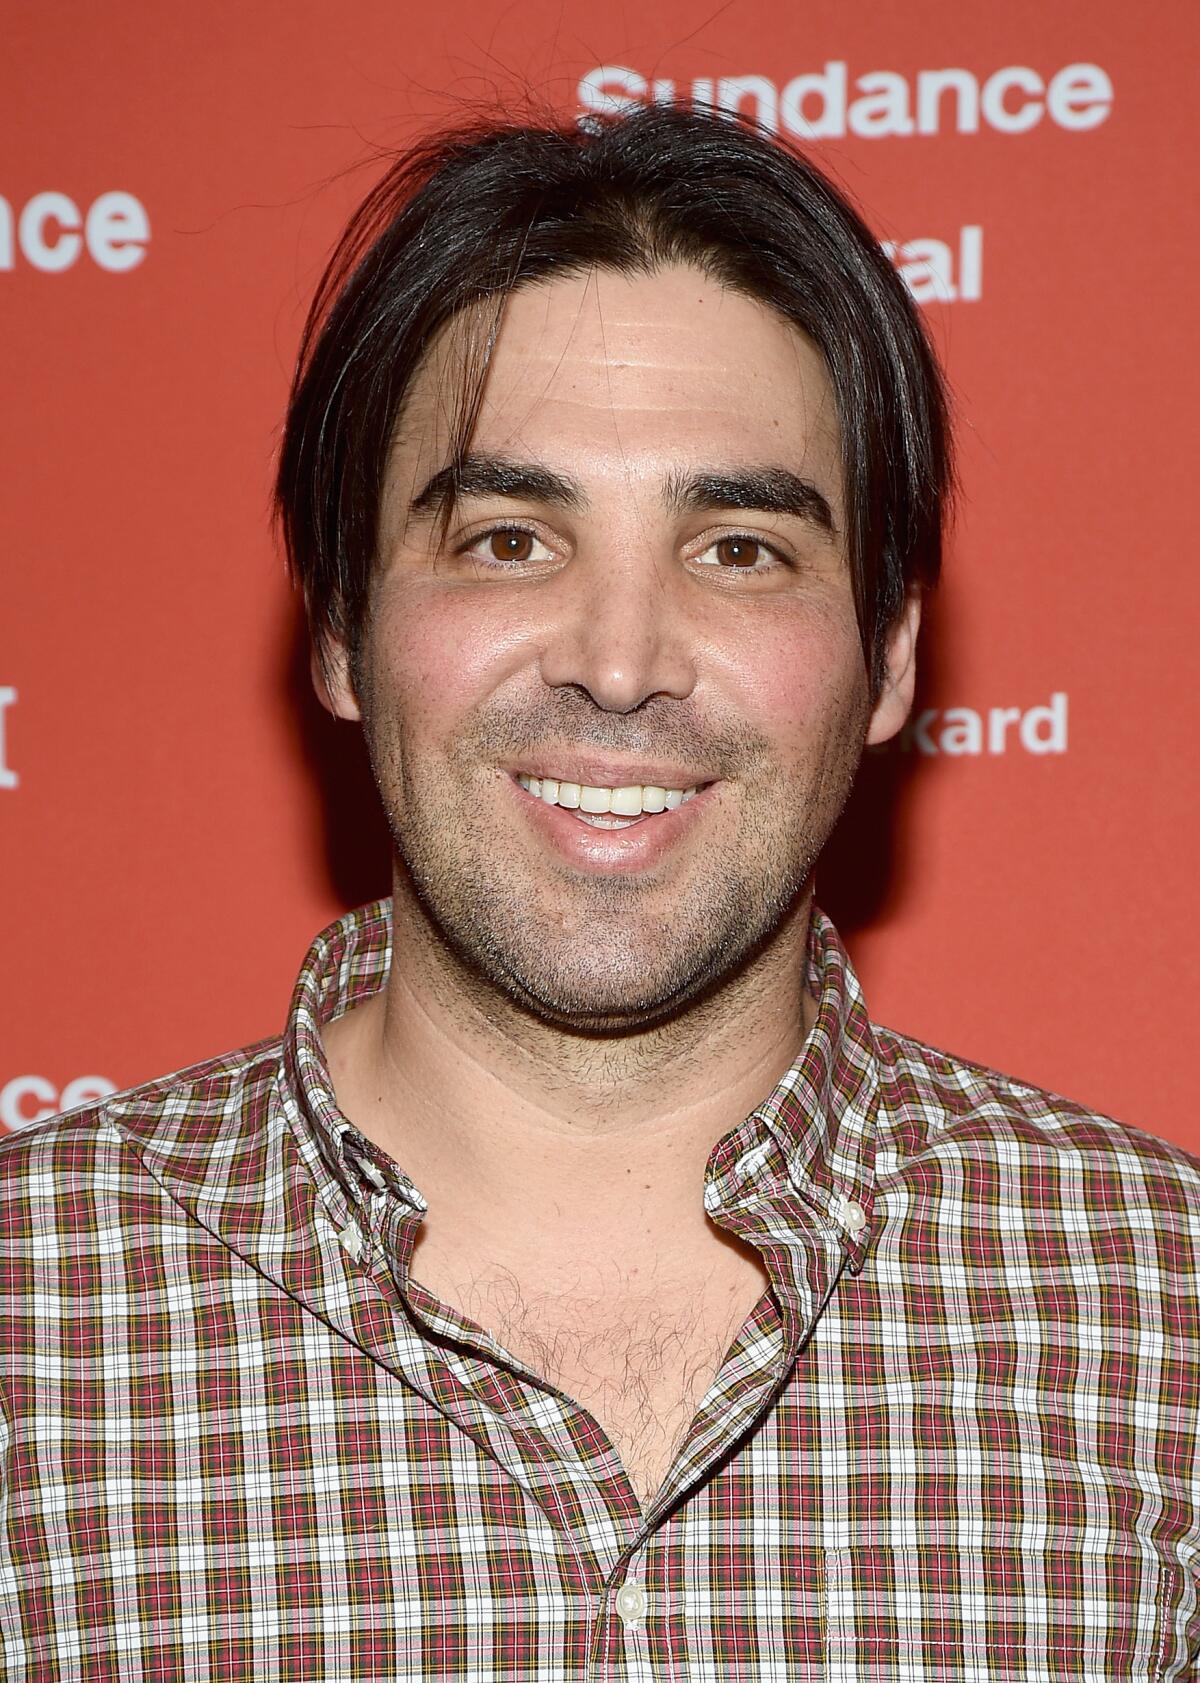 A man with dark hair and facial stubble smiles.